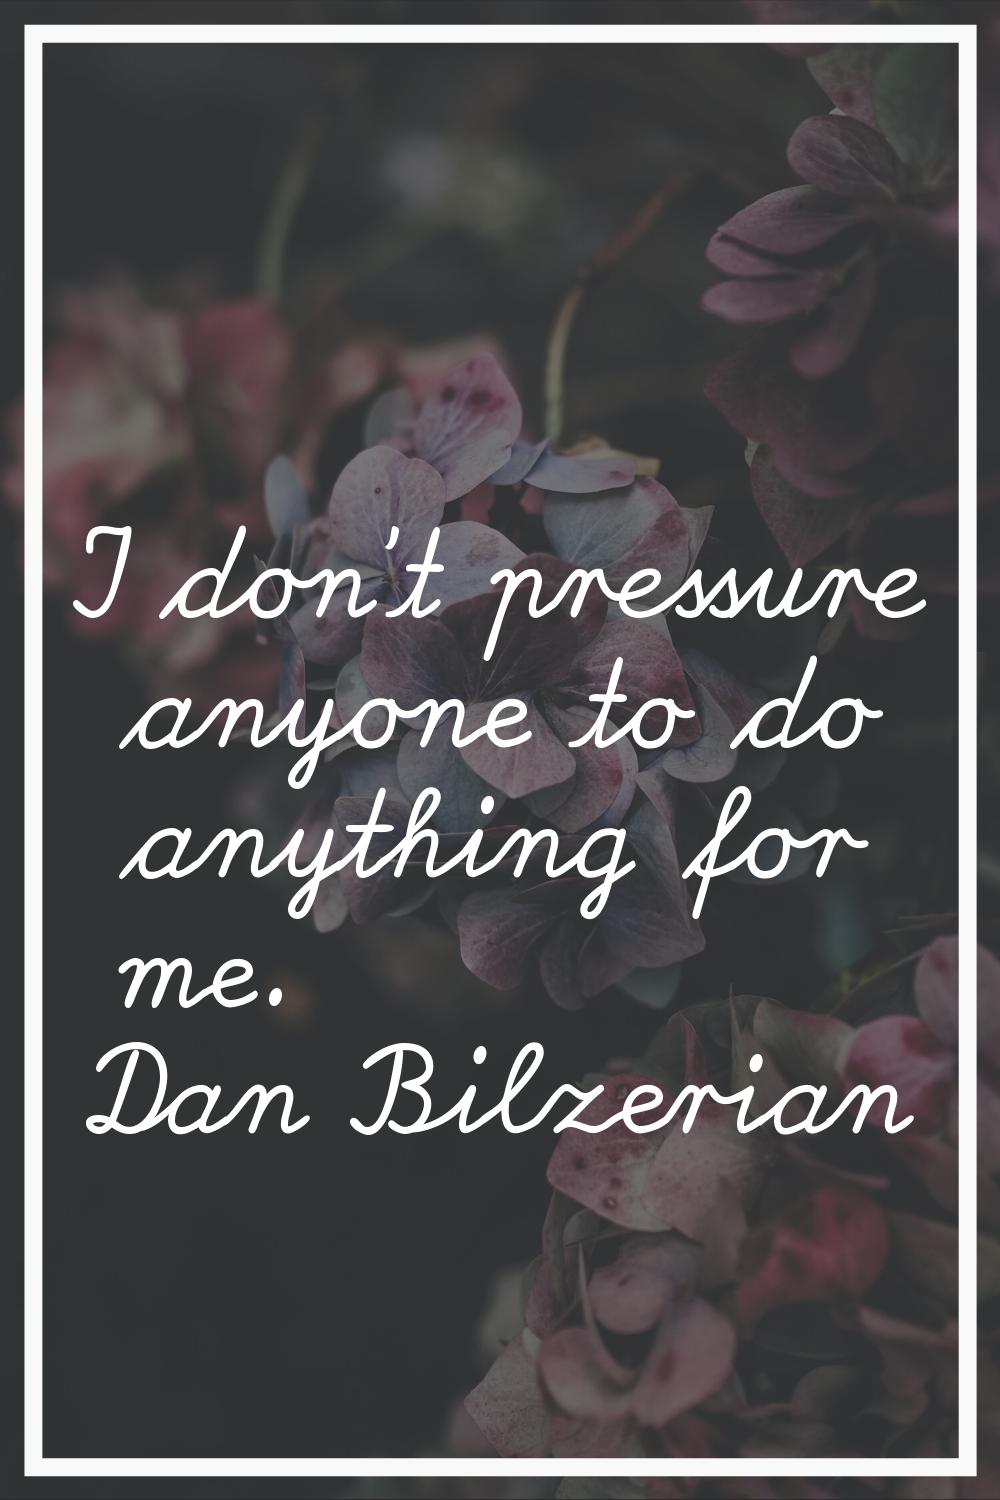 I don't pressure anyone to do anything for me.